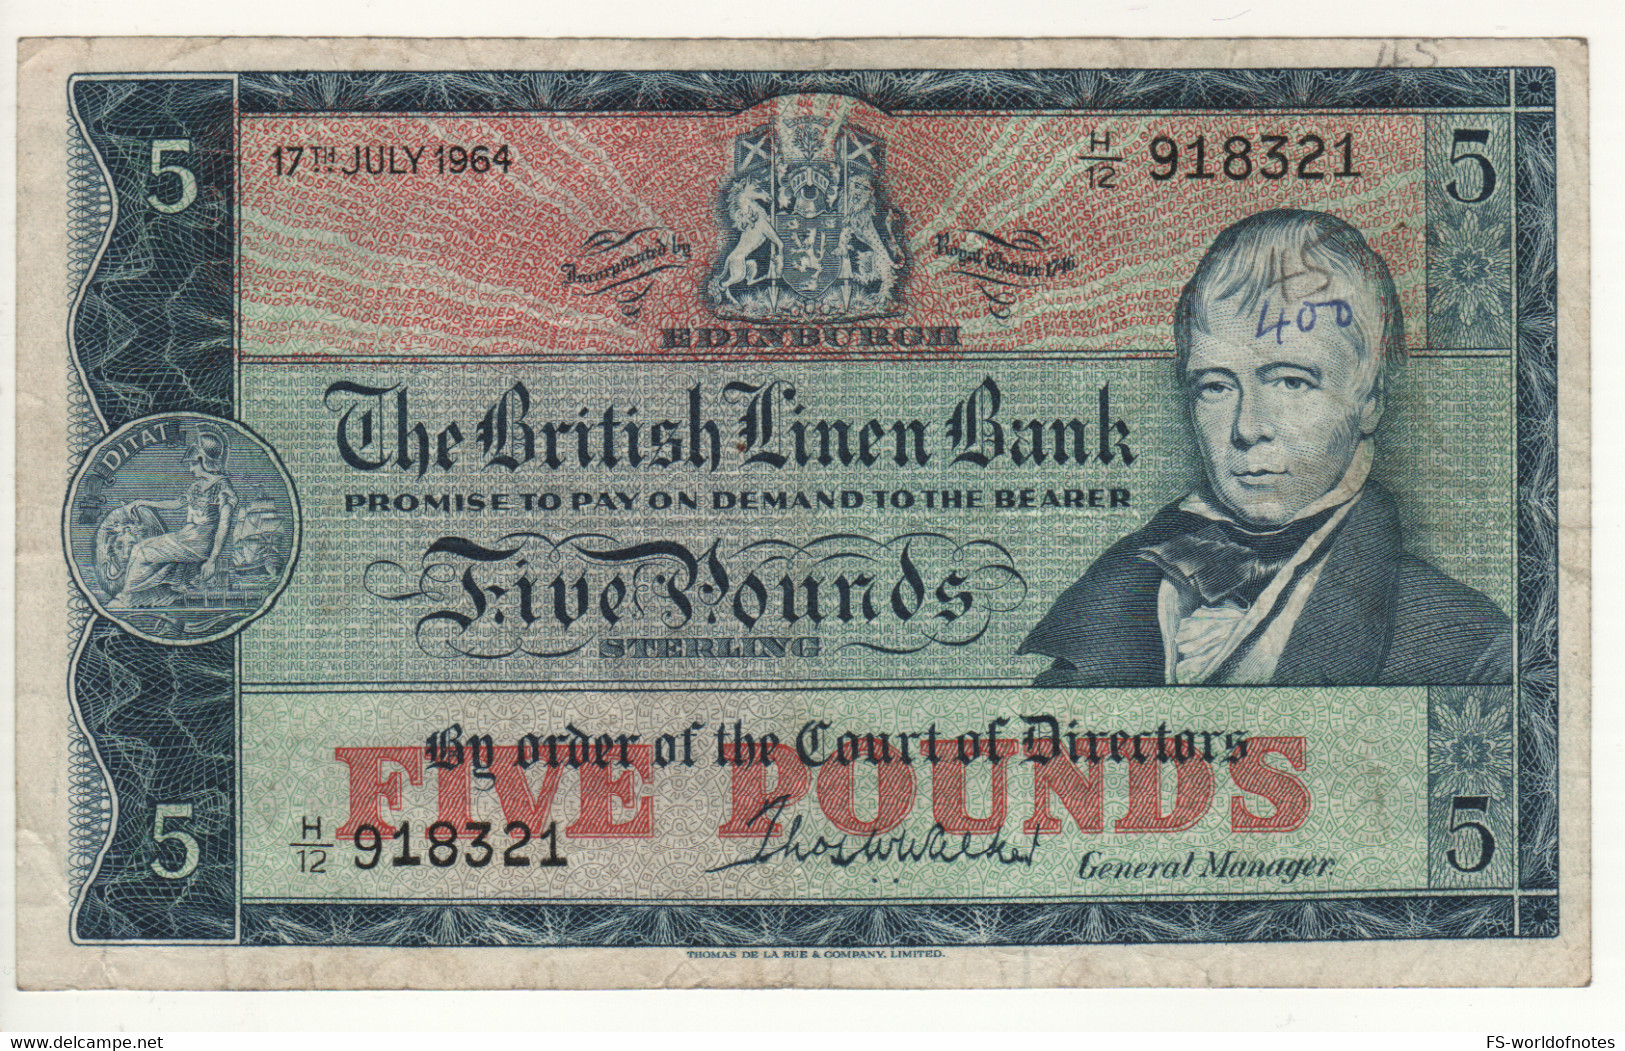 SCOTLAND  5 Pounds The British Linen Bank     P167b   (Sir Walter Scott  Dated 18th August 1964 ) - 5 Pounds